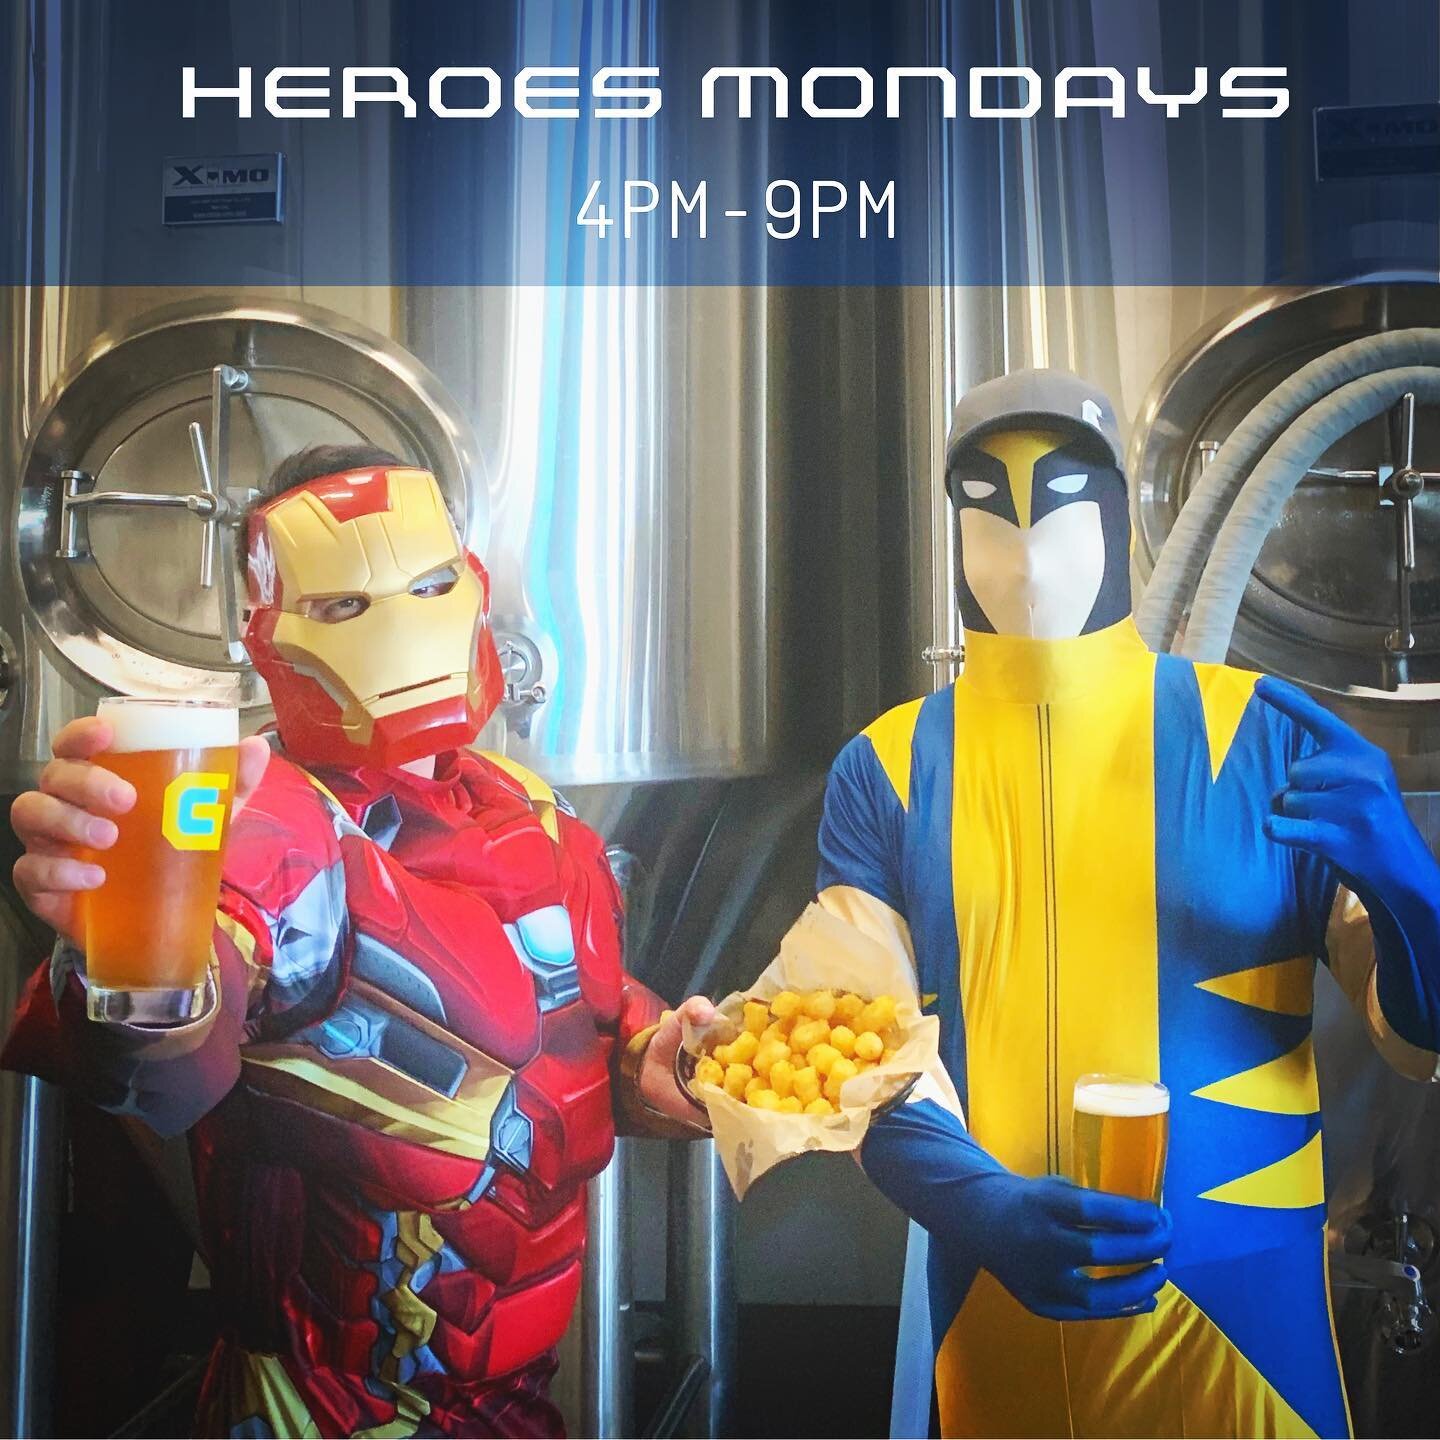 HEROES MONDAYS Now open on Mondays from 4pm-9pm with a Heroes mega-discount for healthcare, essential workers, military, and first responders.

Thanks to everyone&rsquo;s efforts we made the transition from purple tier to red tier.  Much appreciation